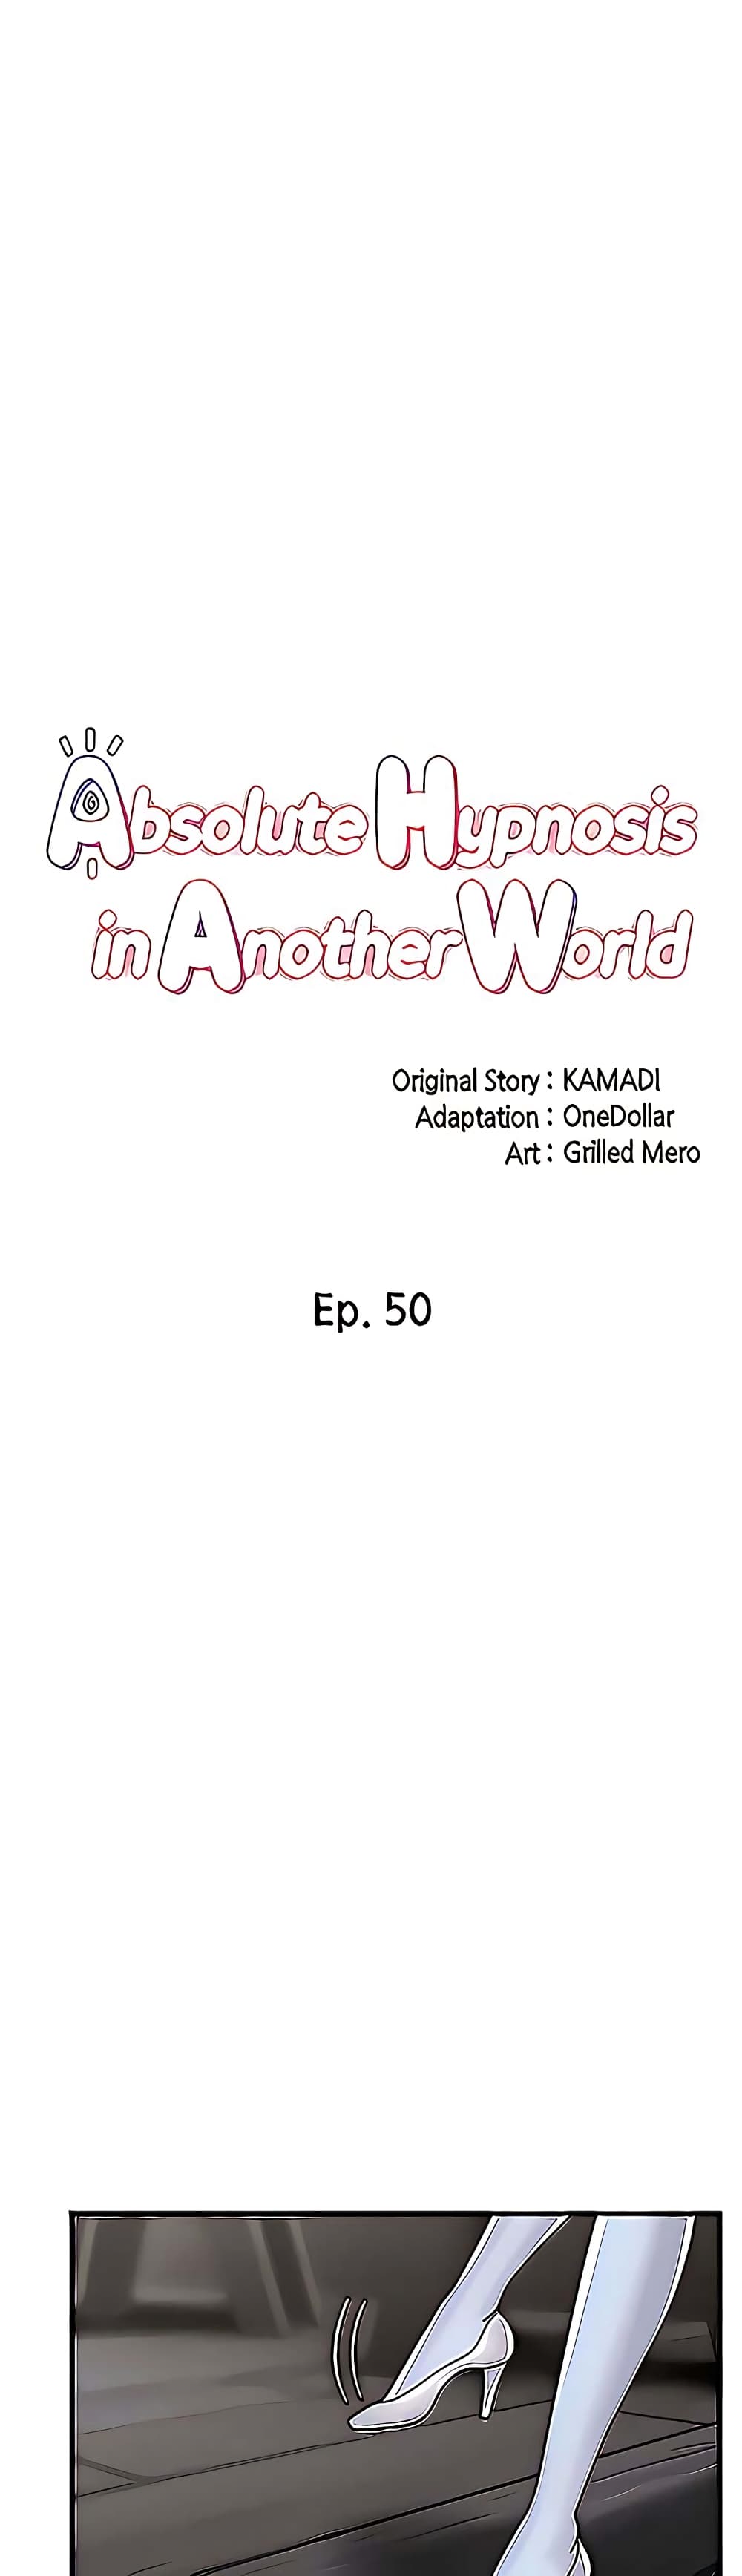 Absolute Hypnosis in Another World 50 (6)